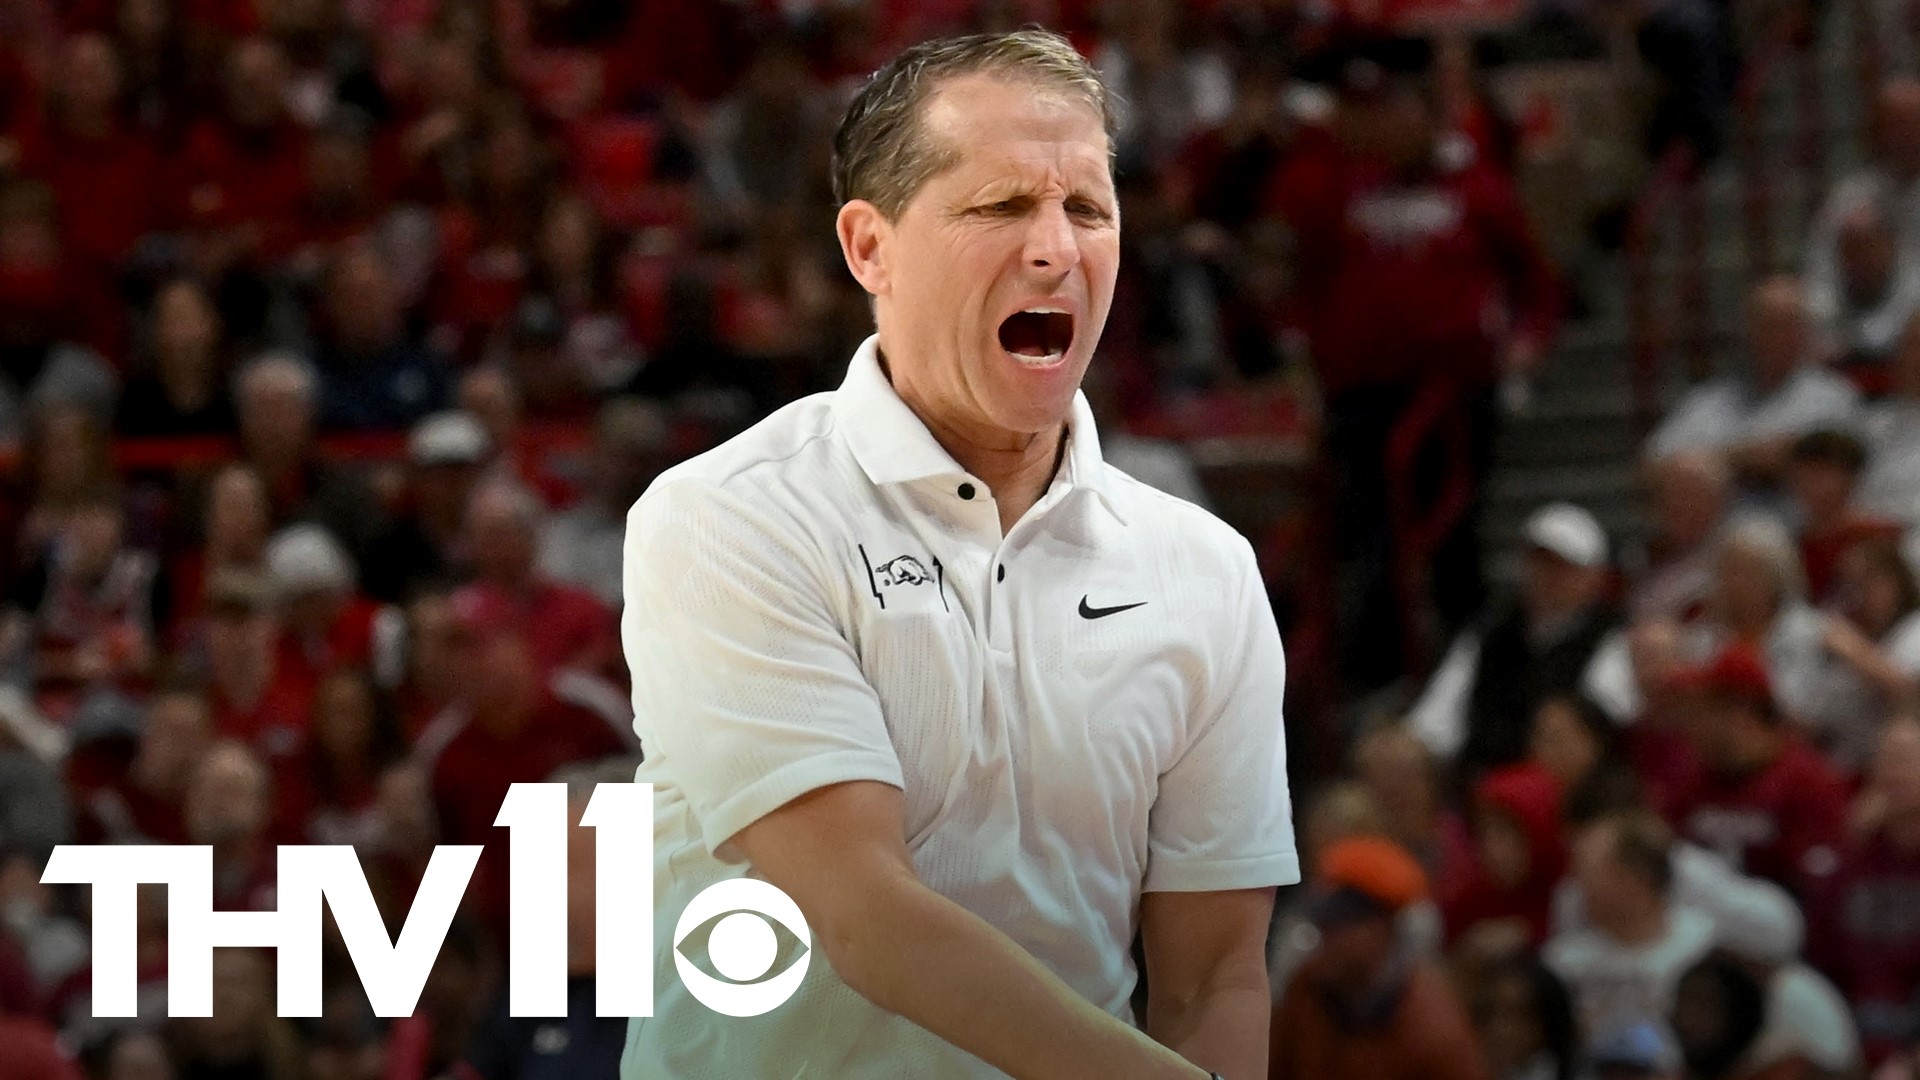 Arkansas coach Eric Musselman speaks to the media following the Razorbacks' 76-66 loss to Georgia. The Hogs are 0-2 in SEC play.